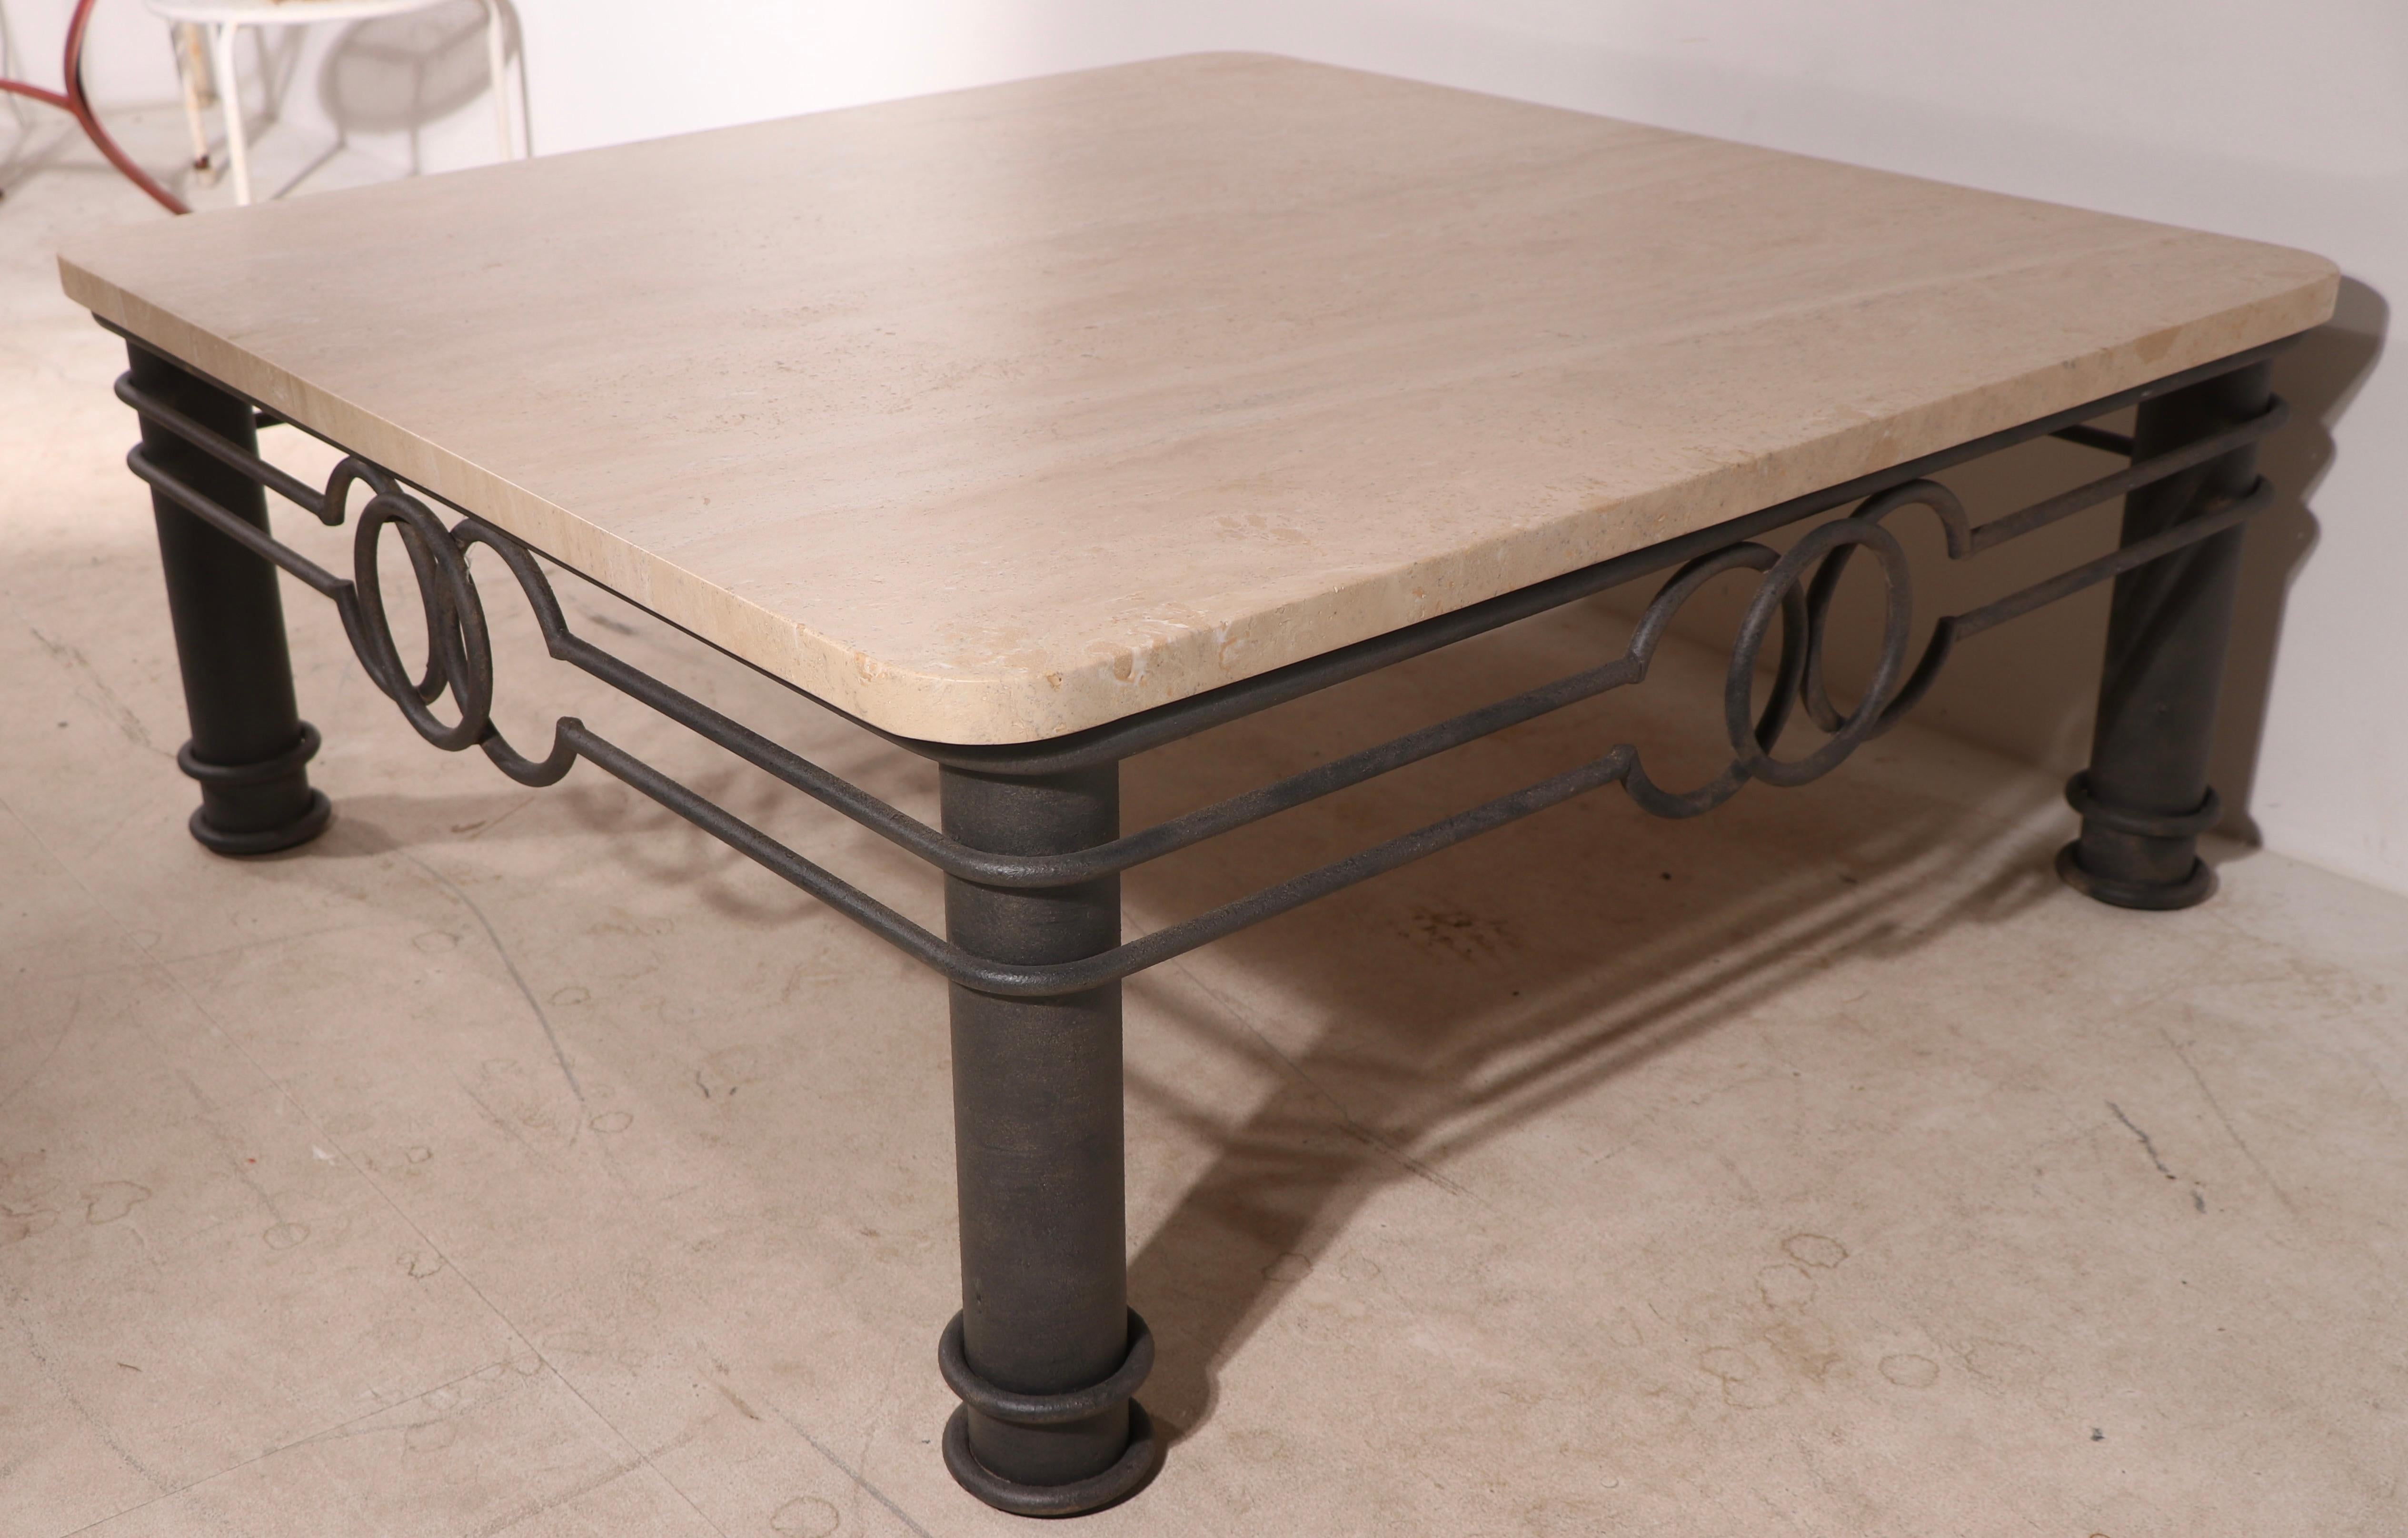 Impressive marble top, wrought iron and steel based coffee, cocktail table reminiscent of the work of Arturo Pani. The thick marble top (3.5 in.) is marked Hecho en Mexico. This example is in very good, original, clean and ready to use condition,